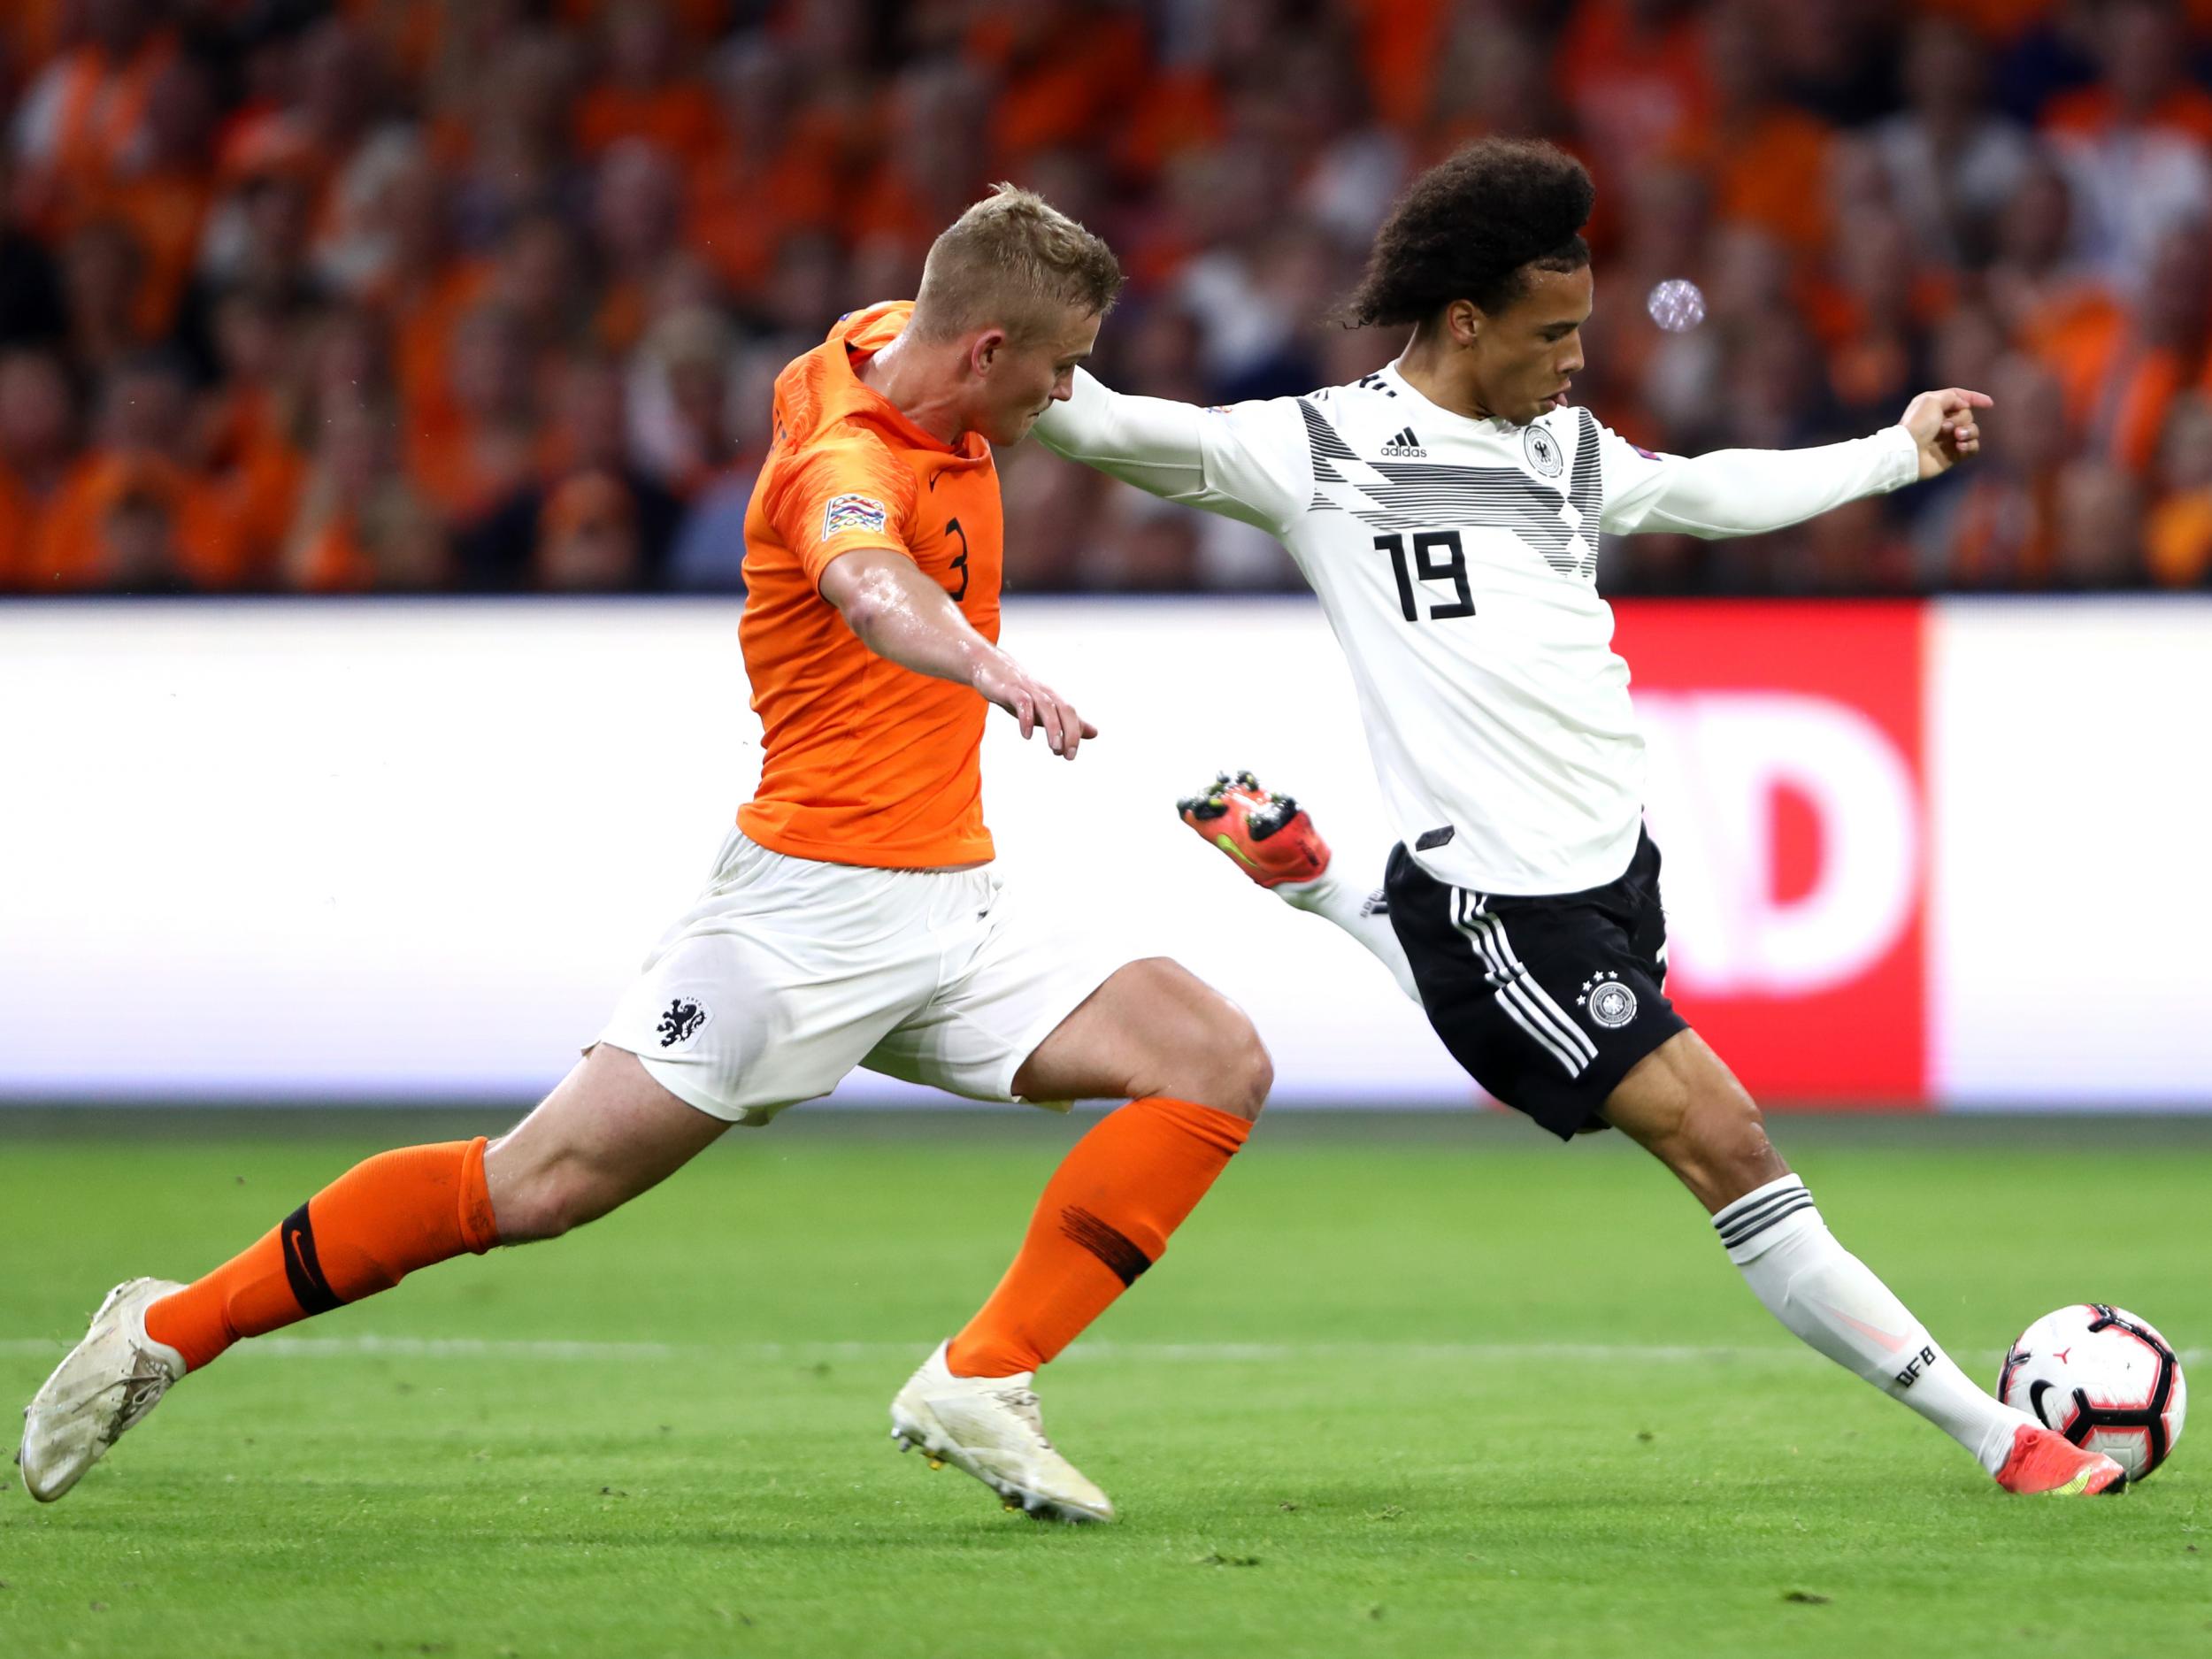 Matthijs de Ligt and Leroy Sane could be teammates next year